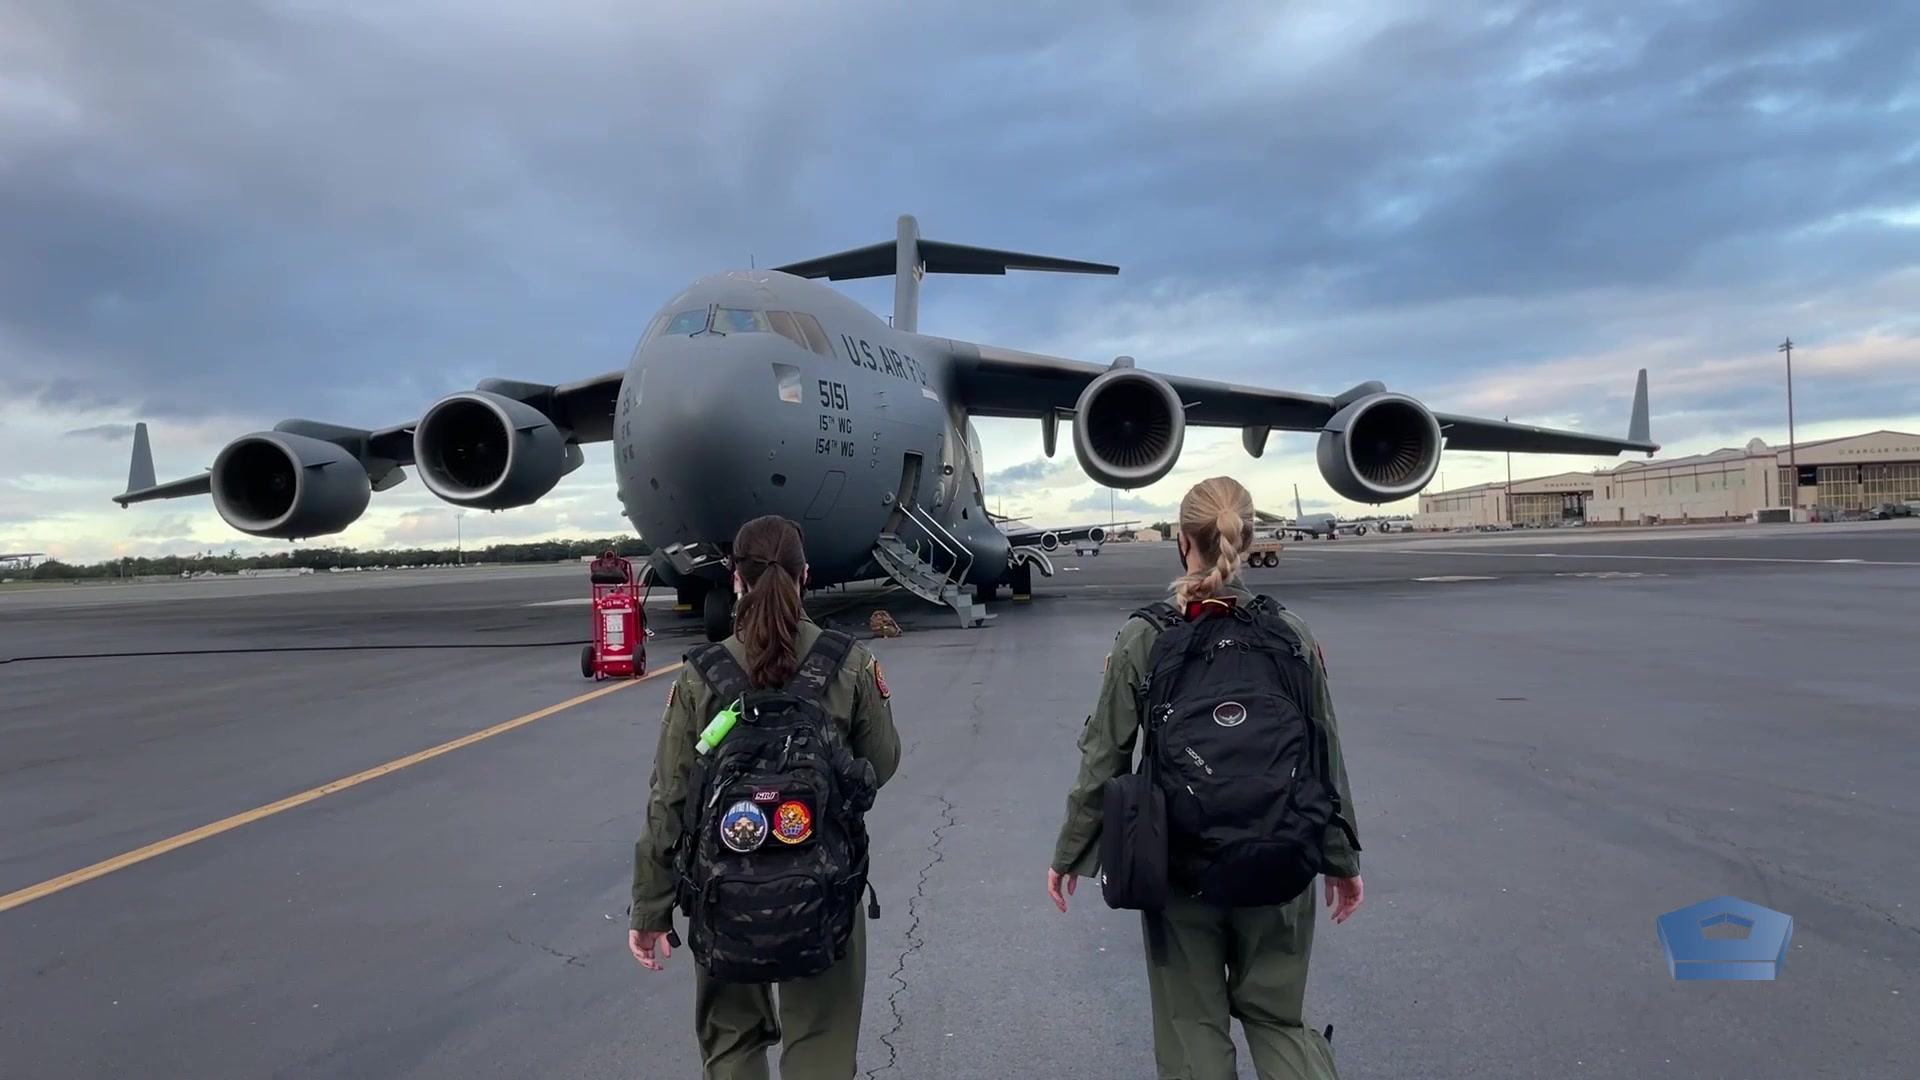 United States Air Force pilots, from U.S. Pacific Air Forces, carry the torch from trailblazers like Amelia Earhart. They inspire future generations of trailblazers every day as they flex their strength in support of the U.S. Indo-Pacific Command.